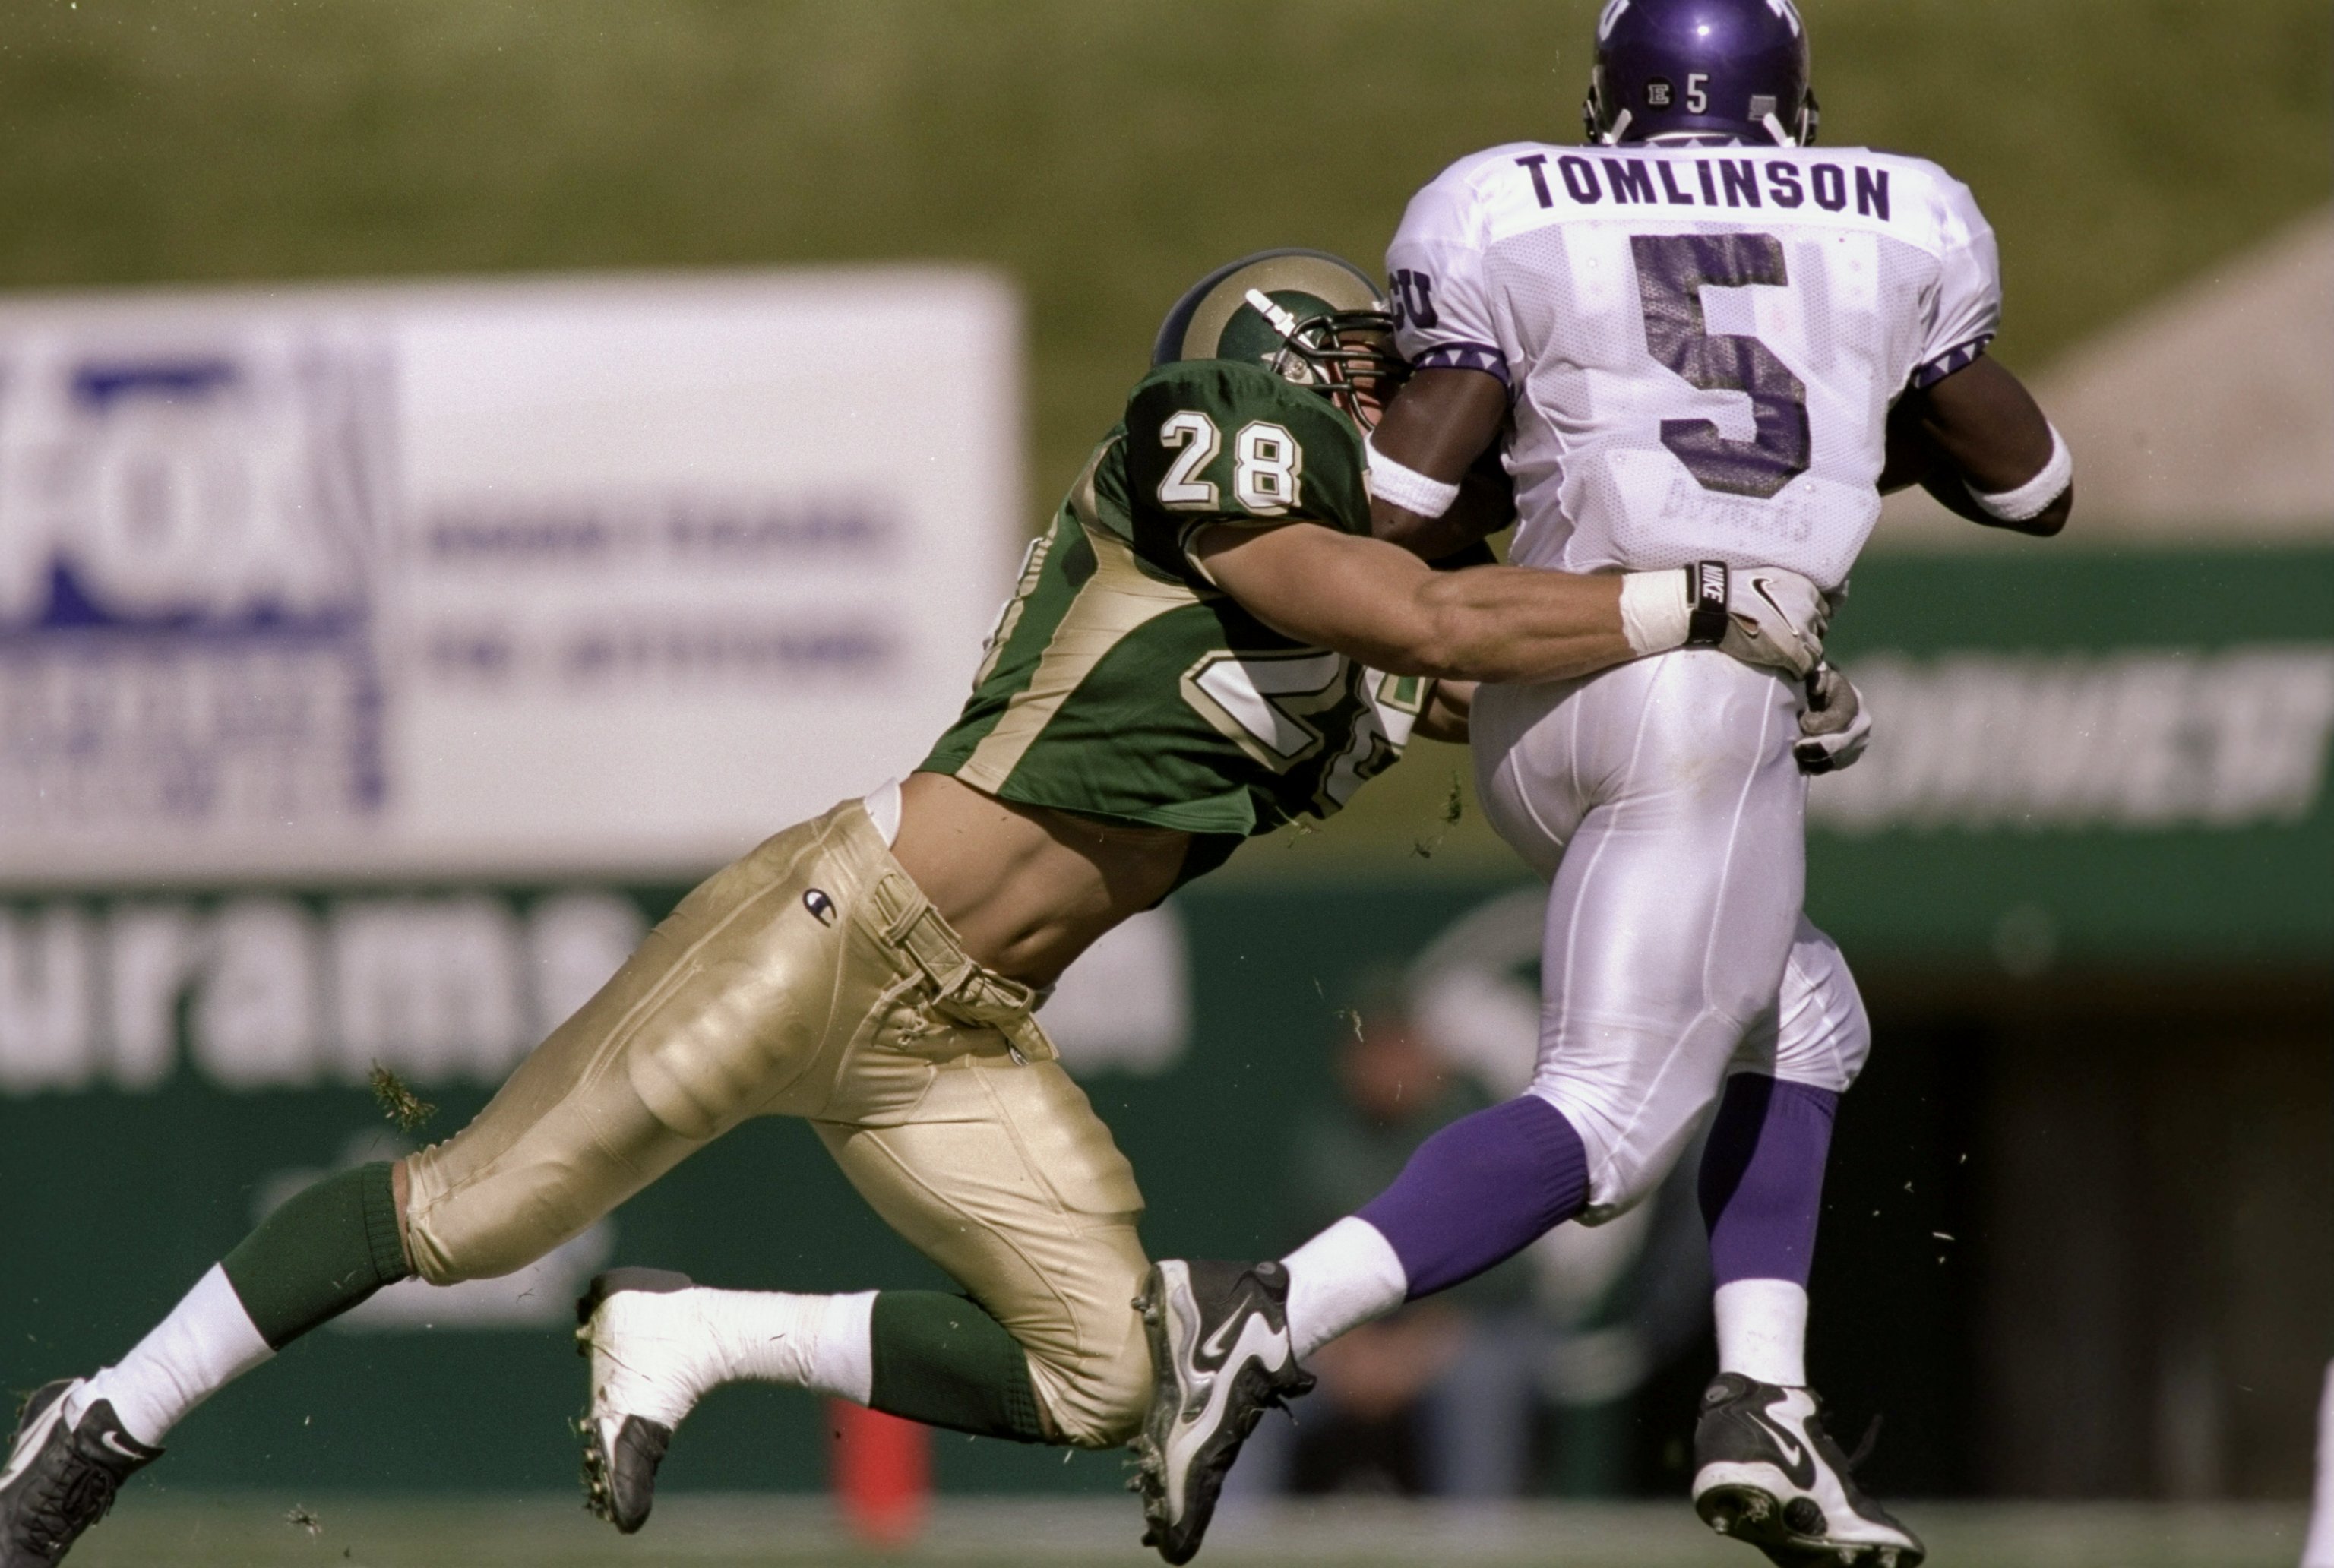 24 Oct 1998:  Defensive back Eric Olson #28 of the Colorado State Rams in action against tailback LaDainian Tomlinson #5 of the TCU Horned Frogs during the game at the Hughes Stadium in Fort Collins, Colorado. The Rams defeated the Horned Frogs 42-21. Man